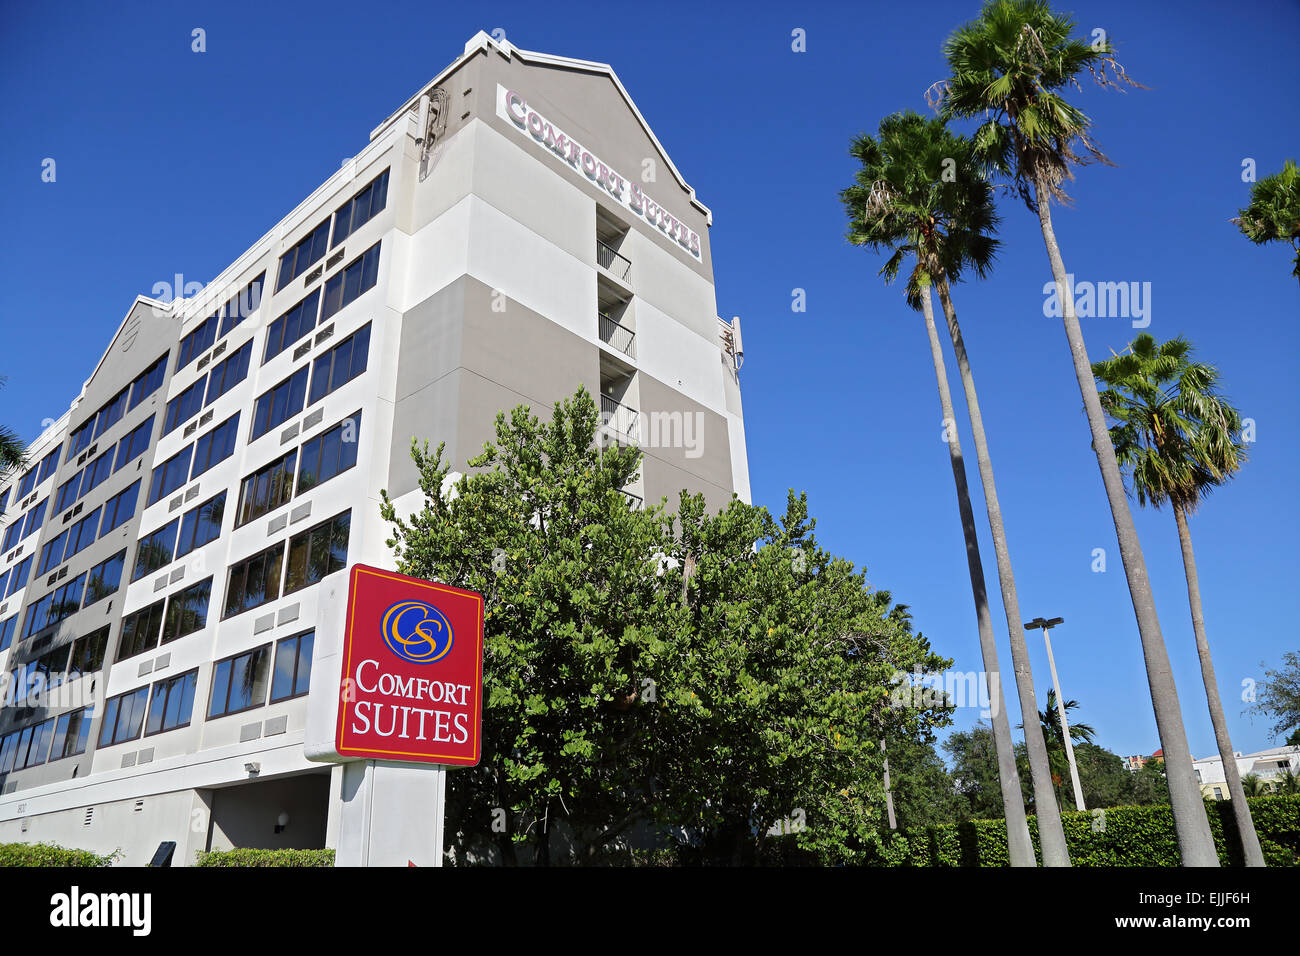 Comfort Suites hotel with Comfort Suites sign at exterior, Fort Lauderdale, Florida, USA Stock Photo